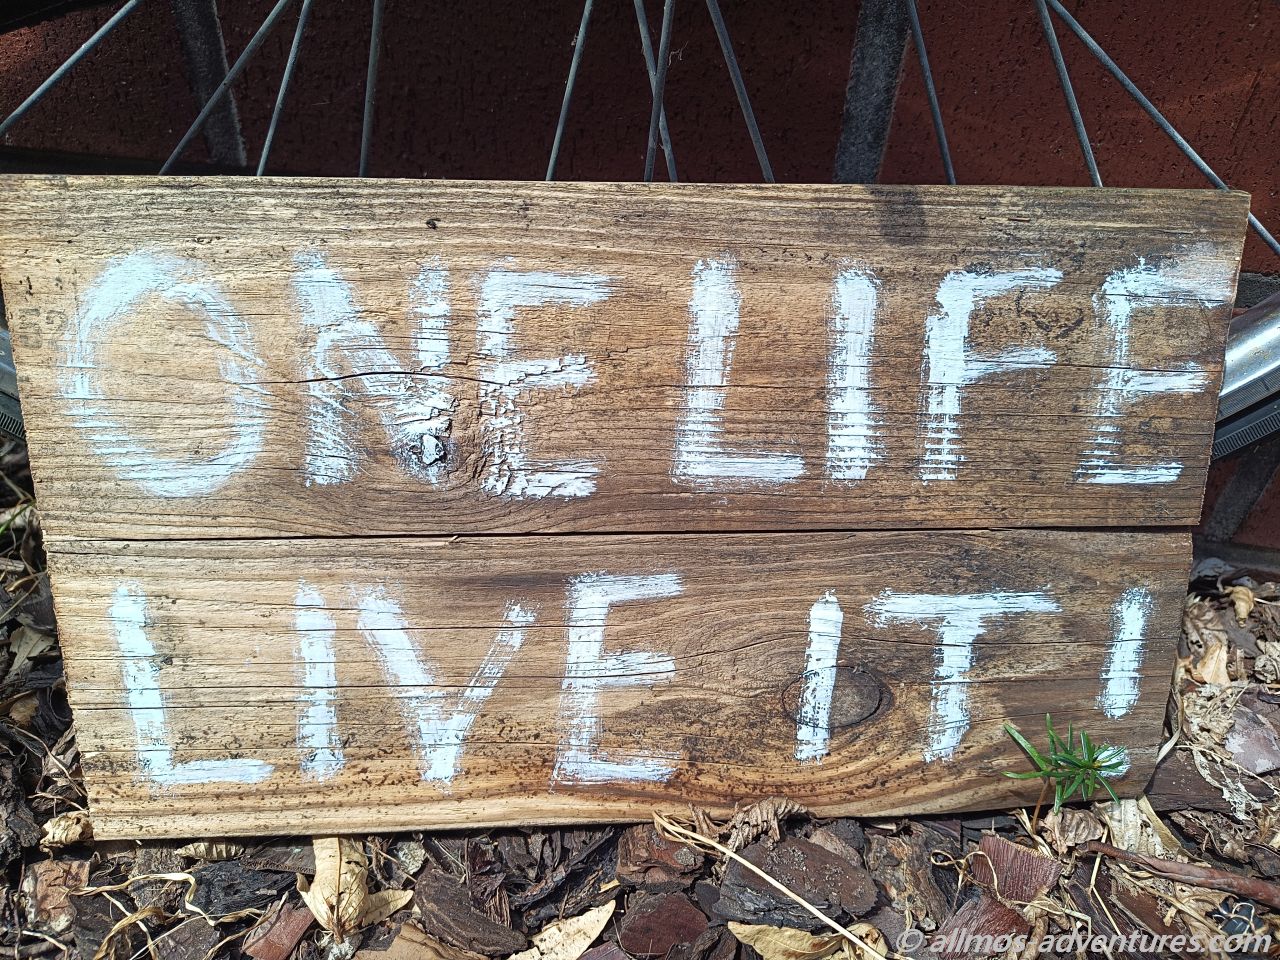 One Life. Live it!